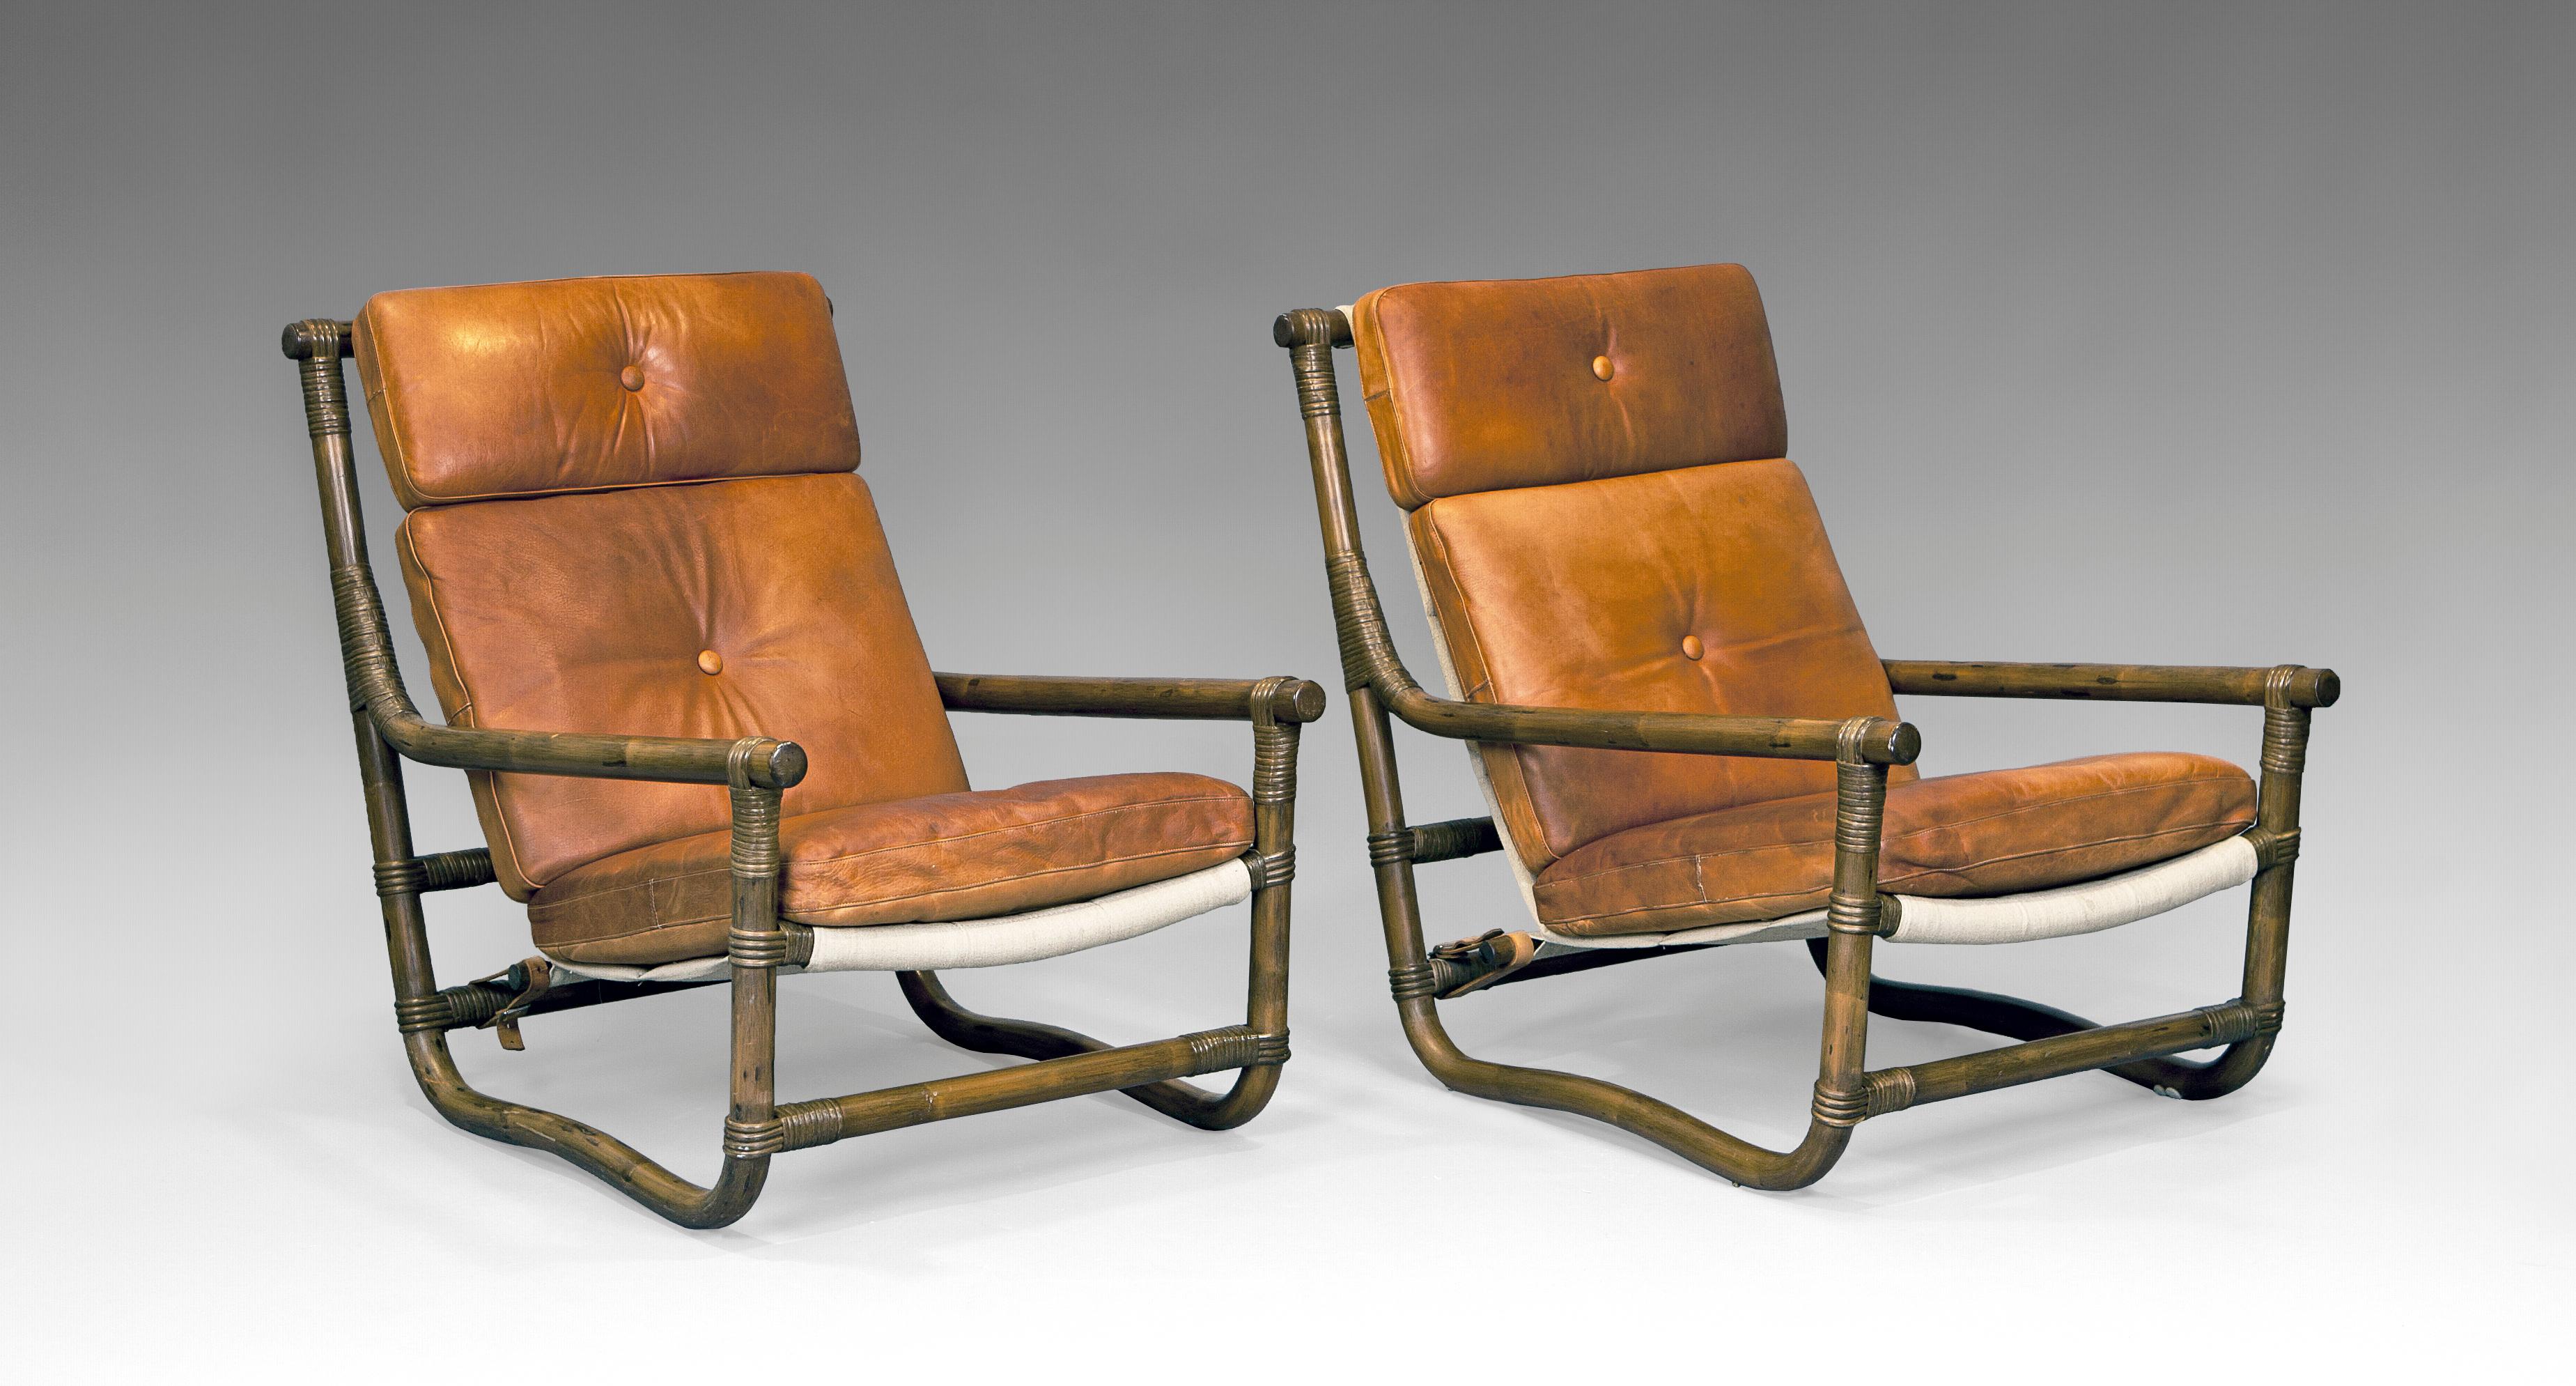 Pair of easy chairs in leather and bamboo. Sweden, 1970’s. Leather and bamboo structure in magnificent original state.